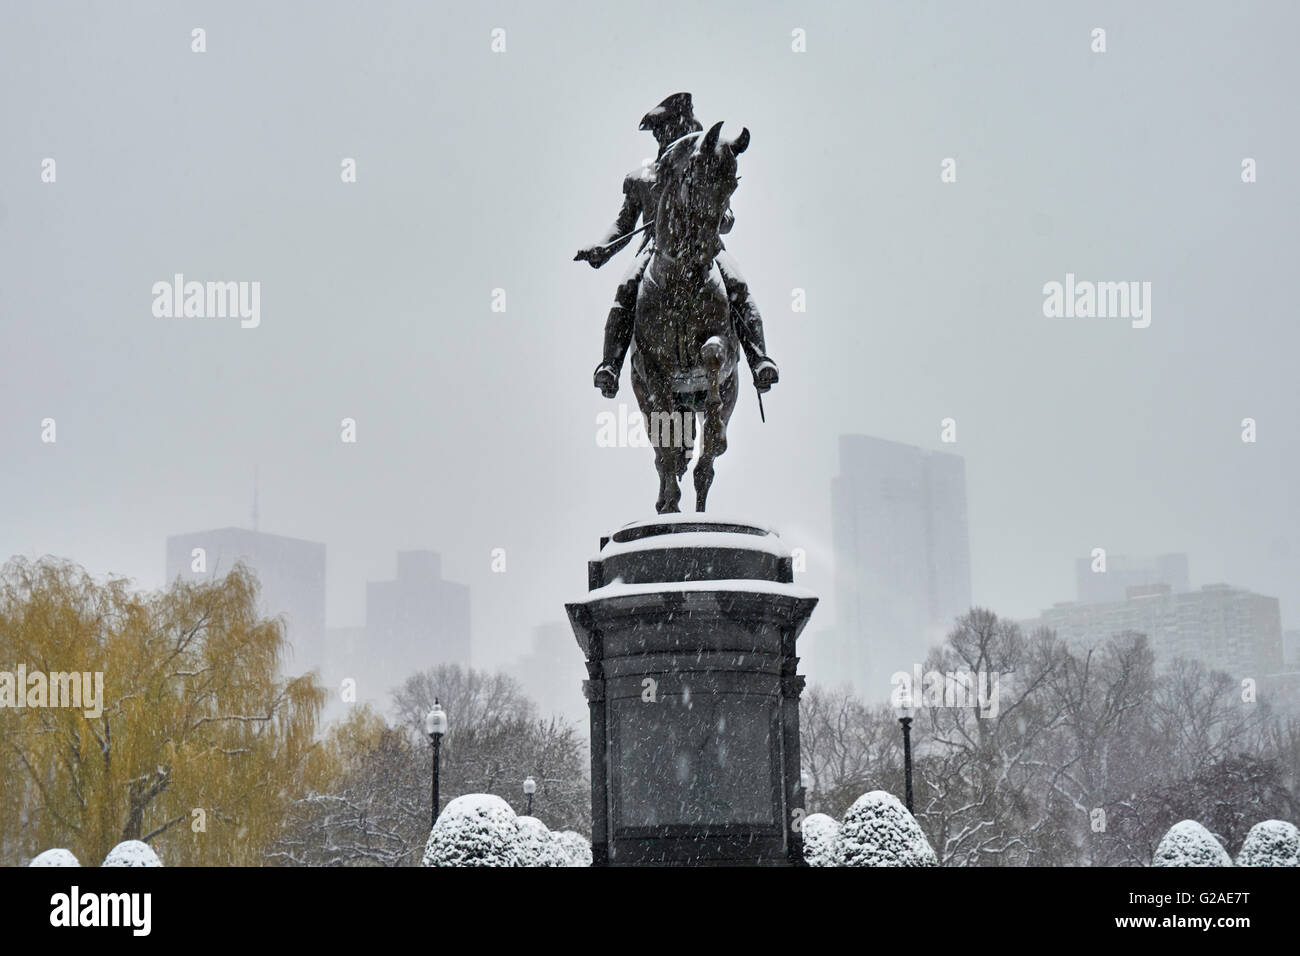 Statue of George Washington on horse in winter Stock Photo